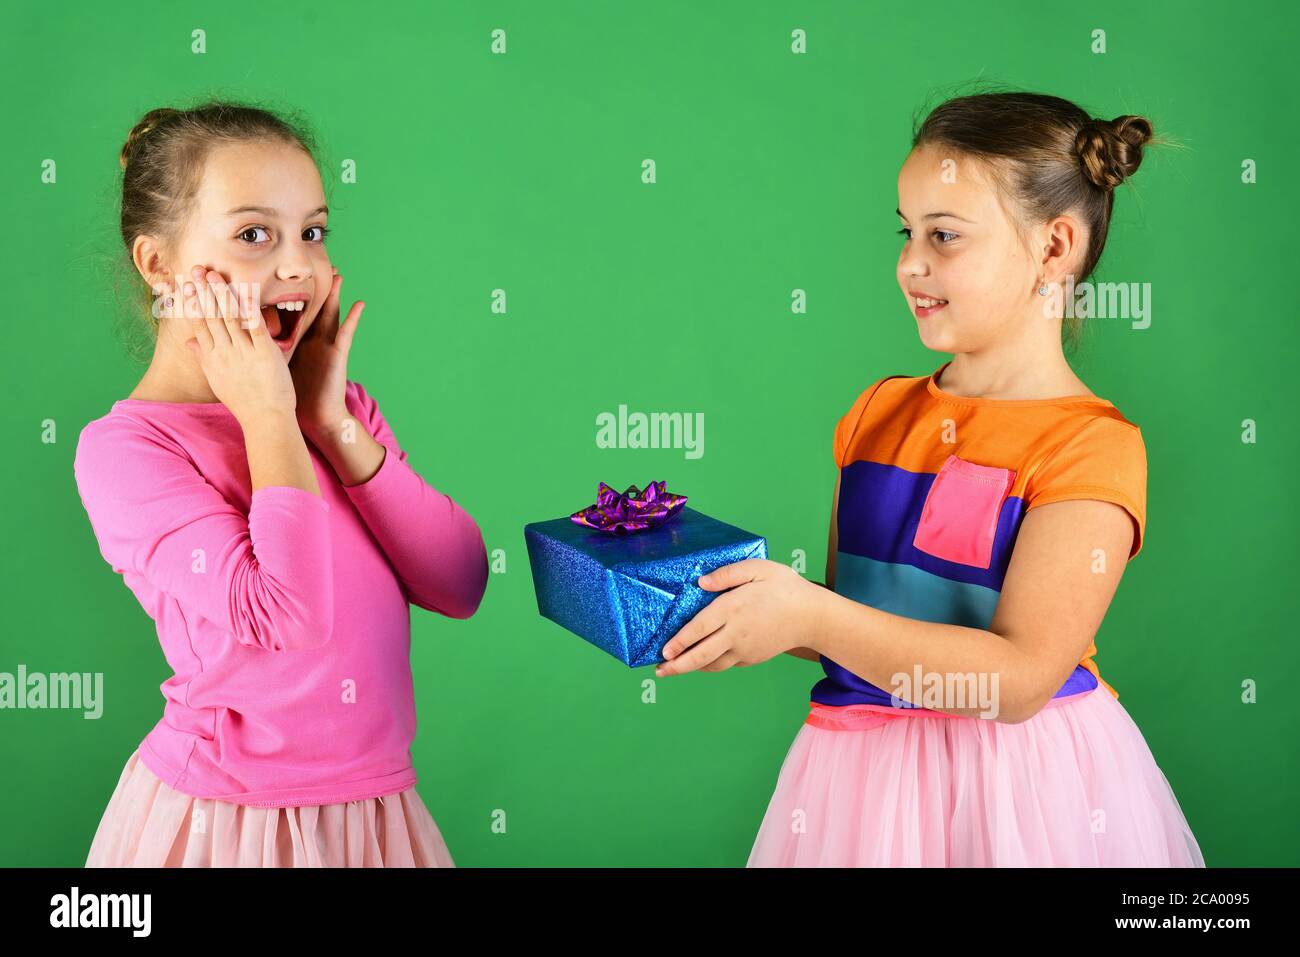 New Year presents concept. Children with shocked faces pose with presents on green background. Sisters with wrapped gift boxes share presents for holiday. Girls open gifts for Christmas. Stock Photo